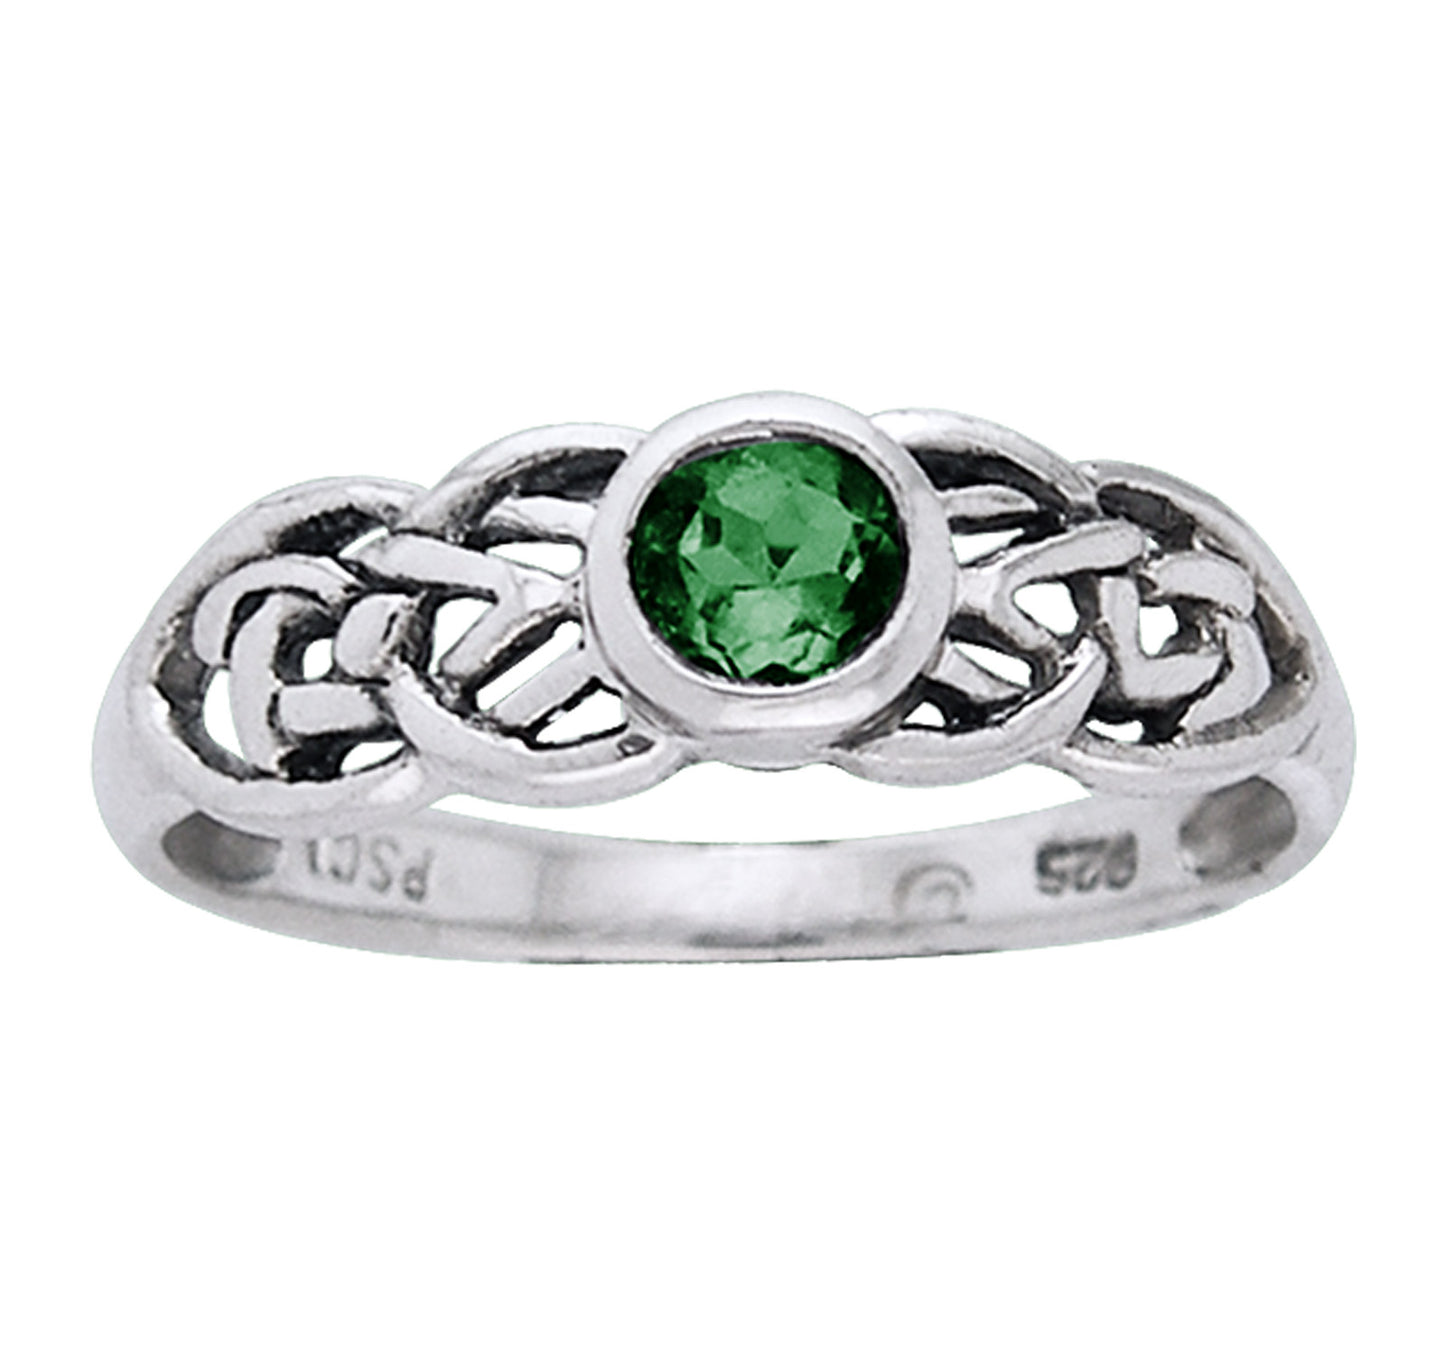 Petite Celtic Knot Birthstone Ring Sterling Silver Green Glass For May - Silver Insanity